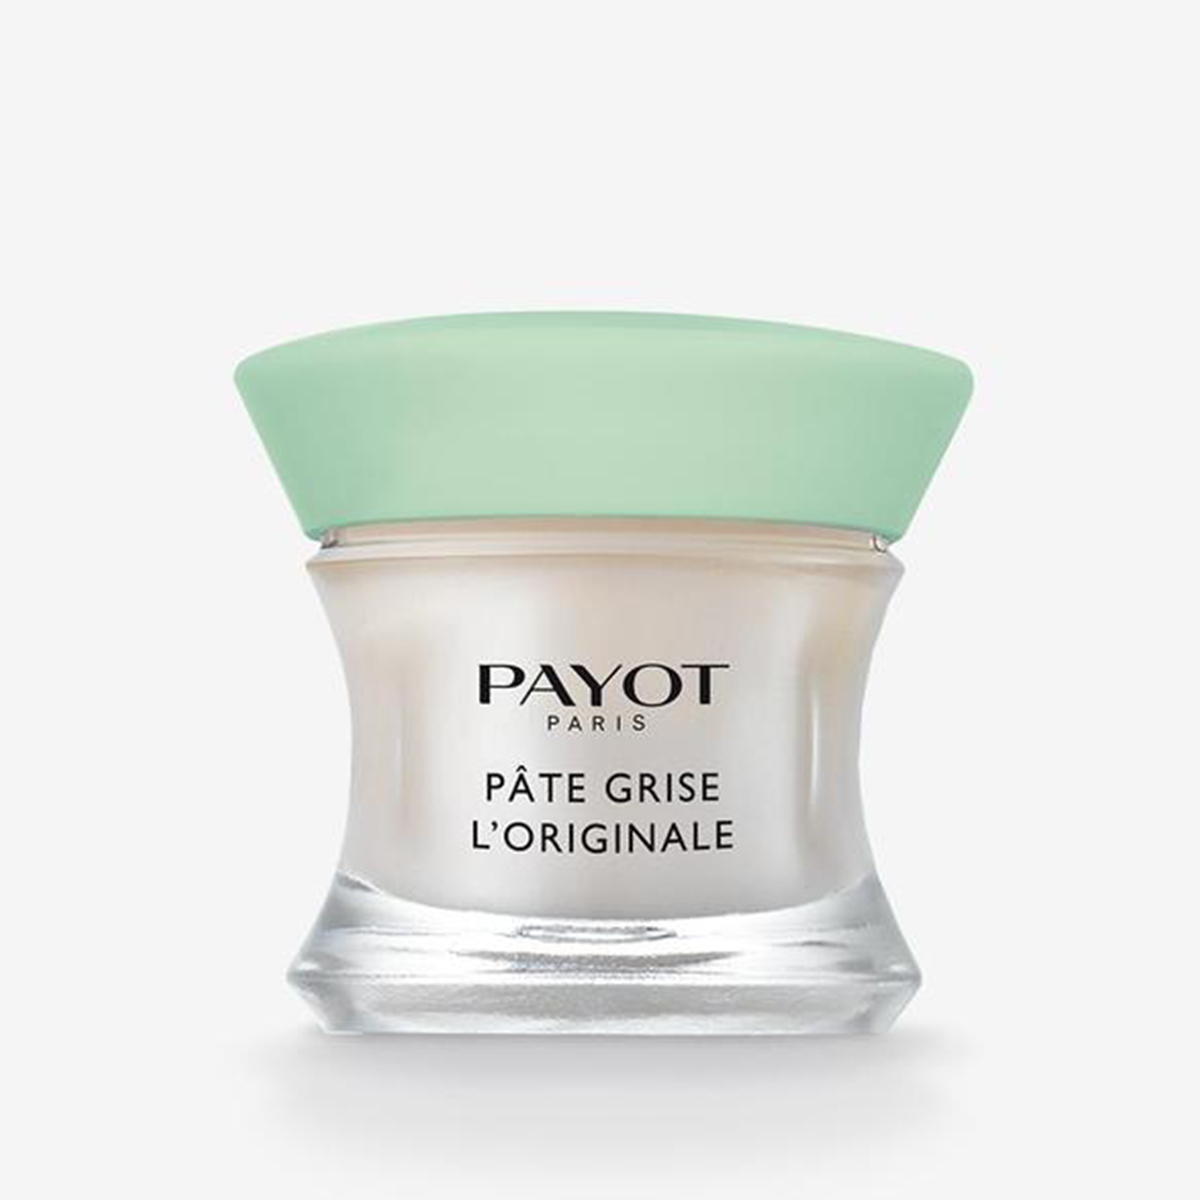 Payot Paris Emergency Anti-imperfecties care